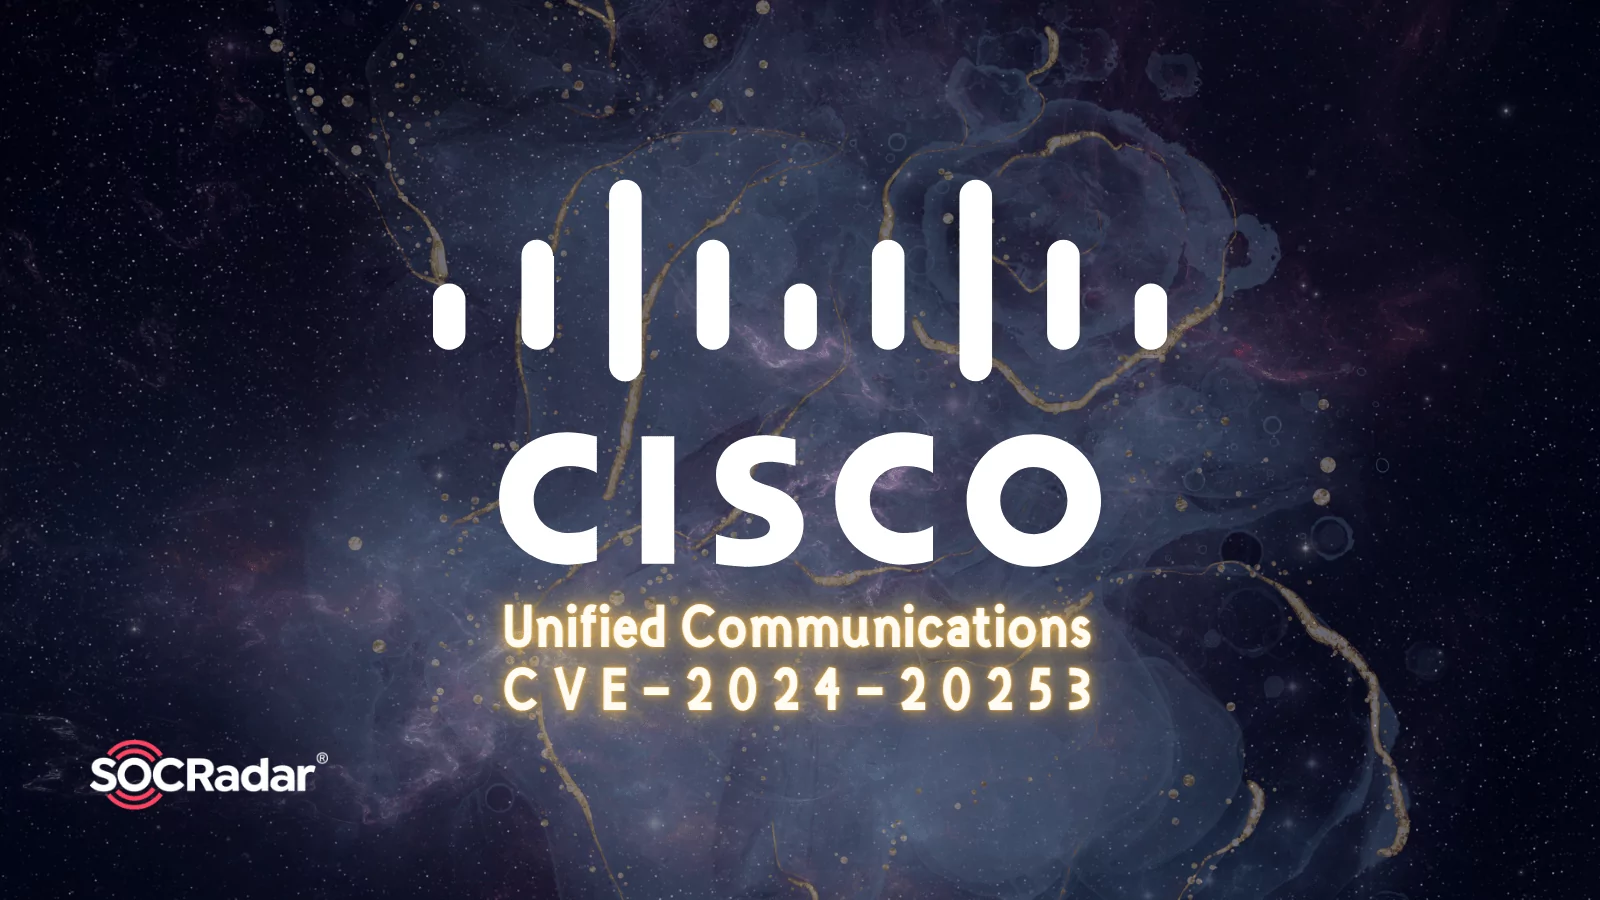 SOCRadar® Cyber Intelligence Inc. | Critical RCE Vulnerability in Cisco Unified Communications with Risk of Root Access (CVE-2024-20253)